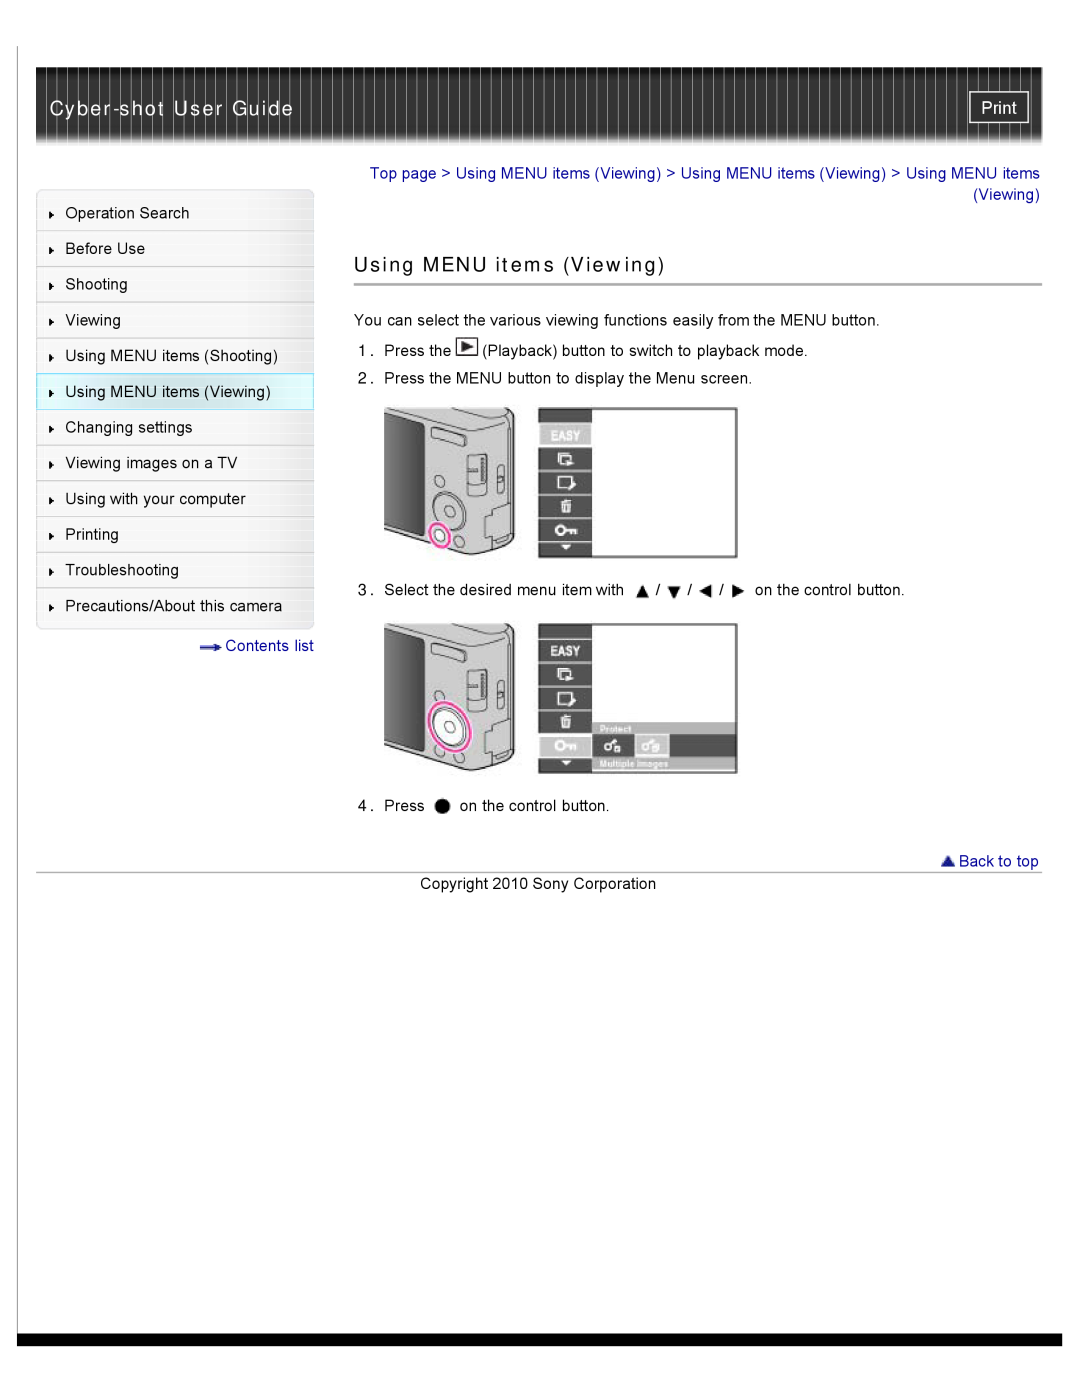 Sony W550, DSC-W530, DSCW530 manual Using MENU items Viewing, Cyber-shot User Guide, Print, Contents list, Back to top 